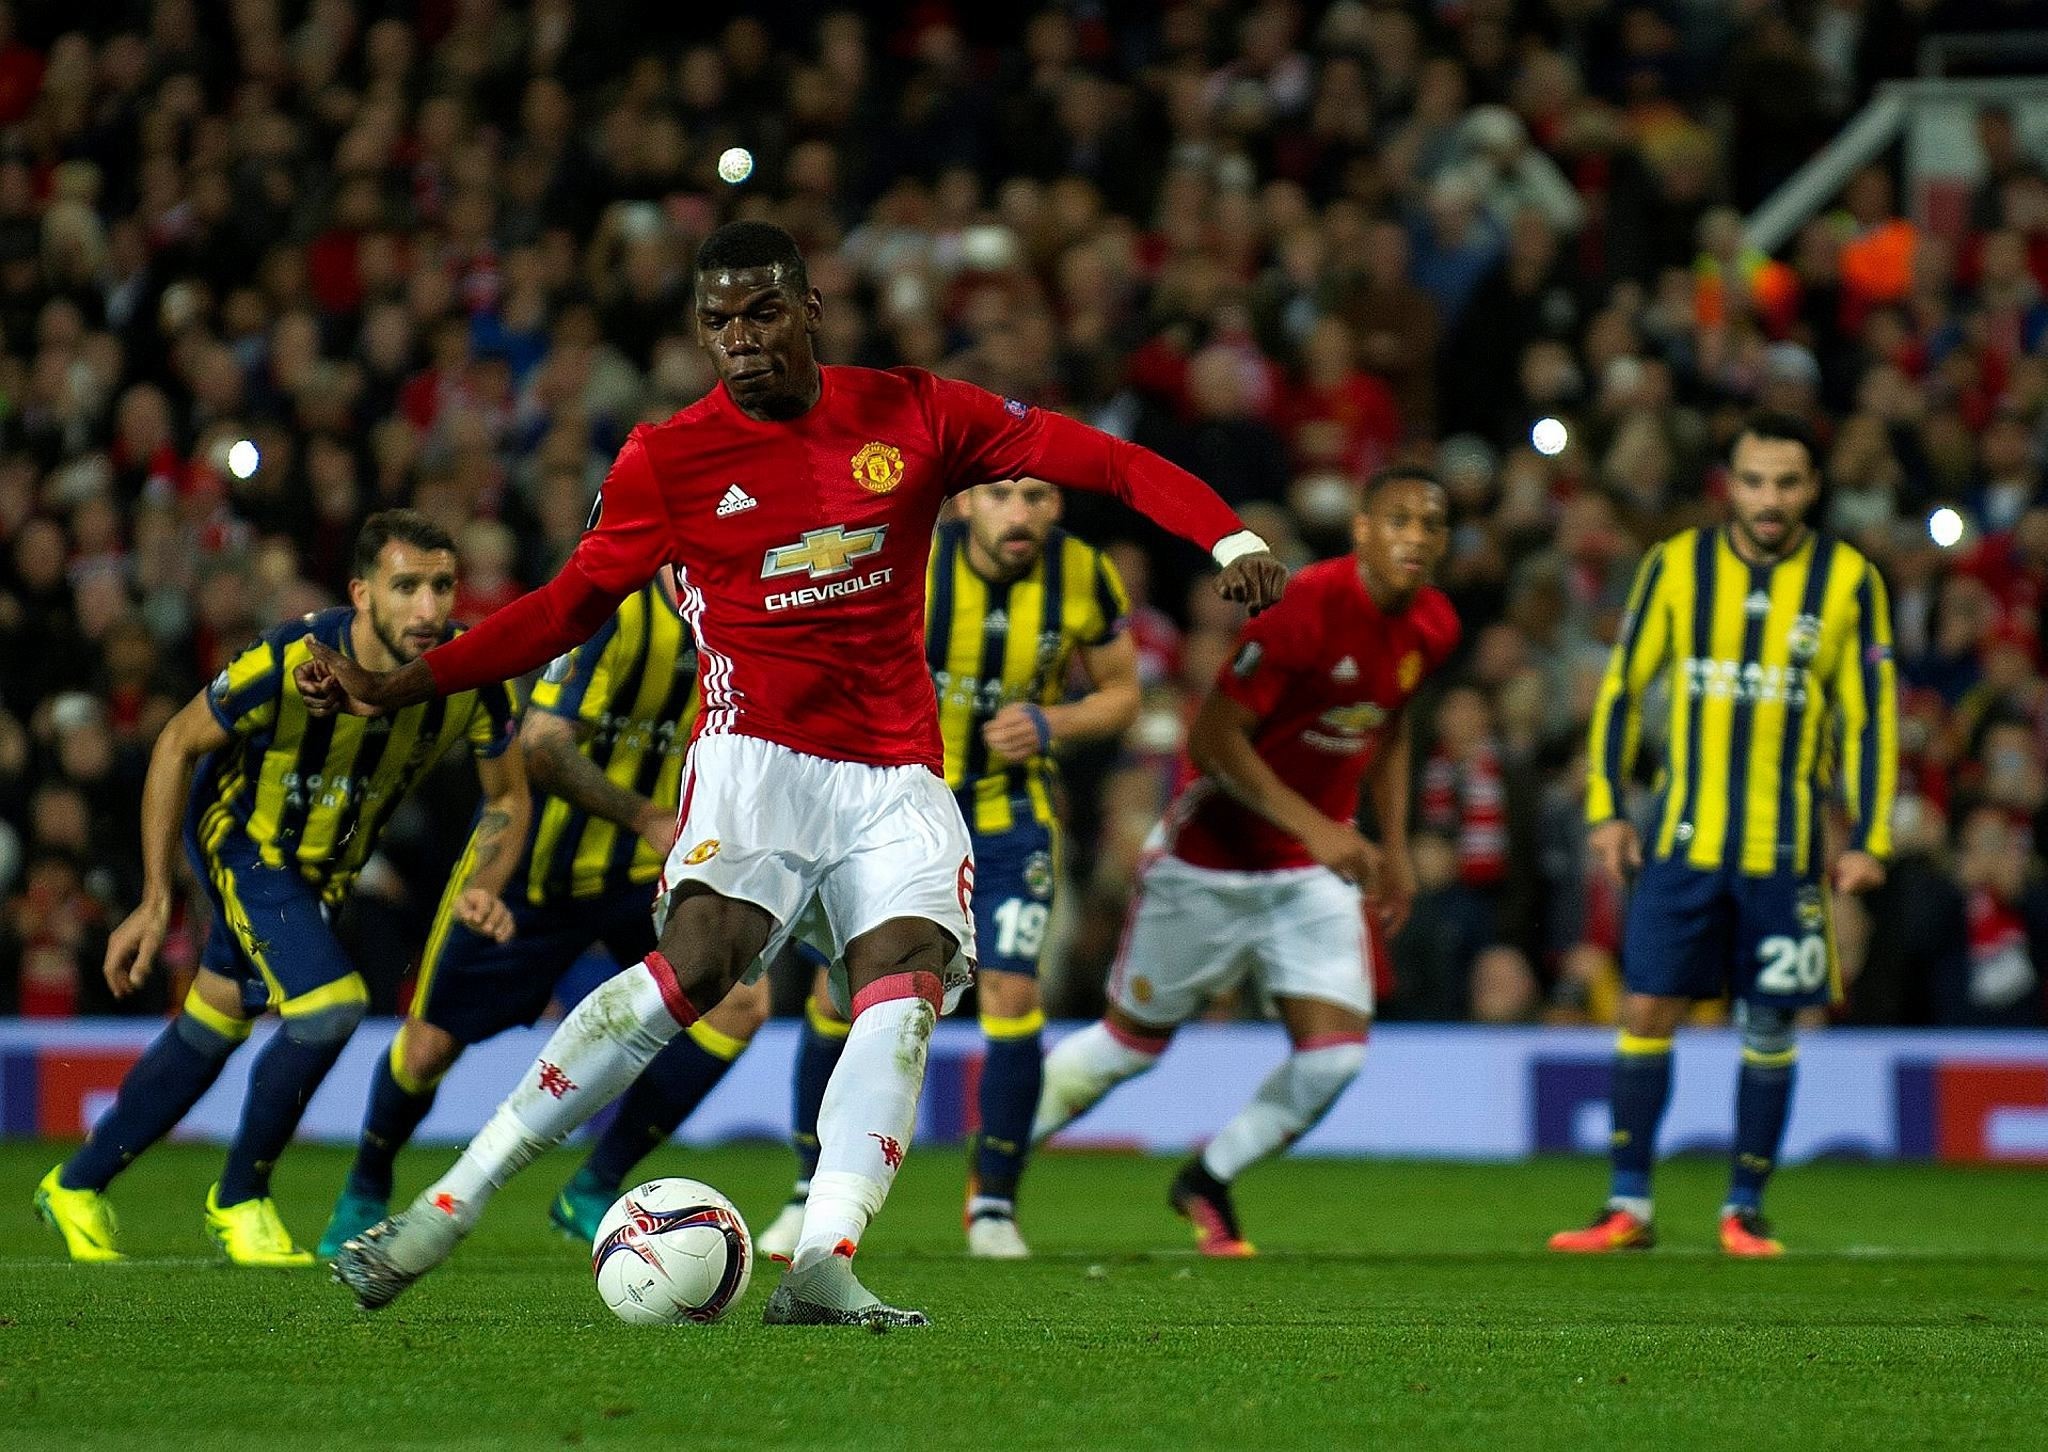 Manchester United's Paul Pogba scores the opening goal during the UEFA Europa League group A match between Manchester United and Fenerbahce. (Reuters Photo)